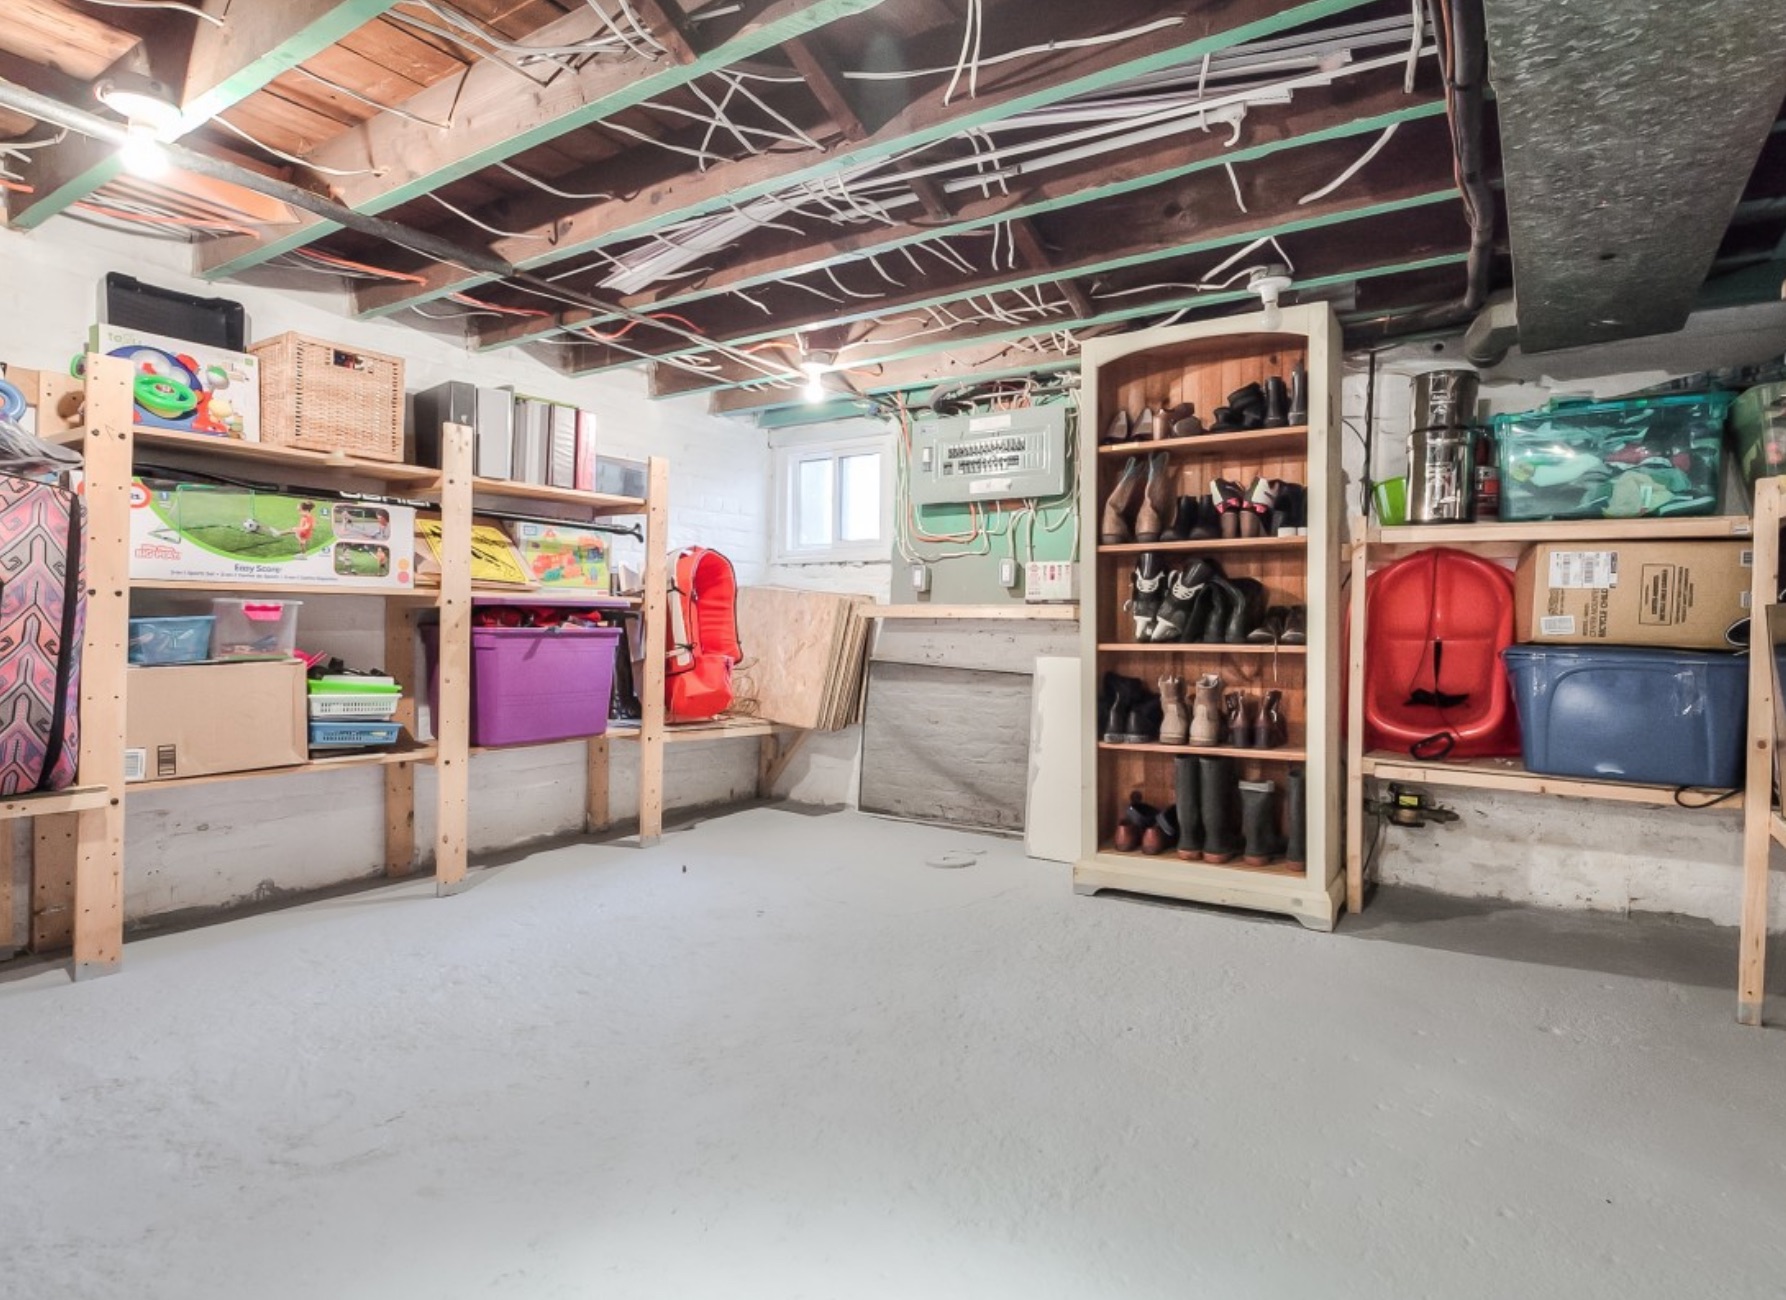 An unfinished basement with plenty of storage space and shelving